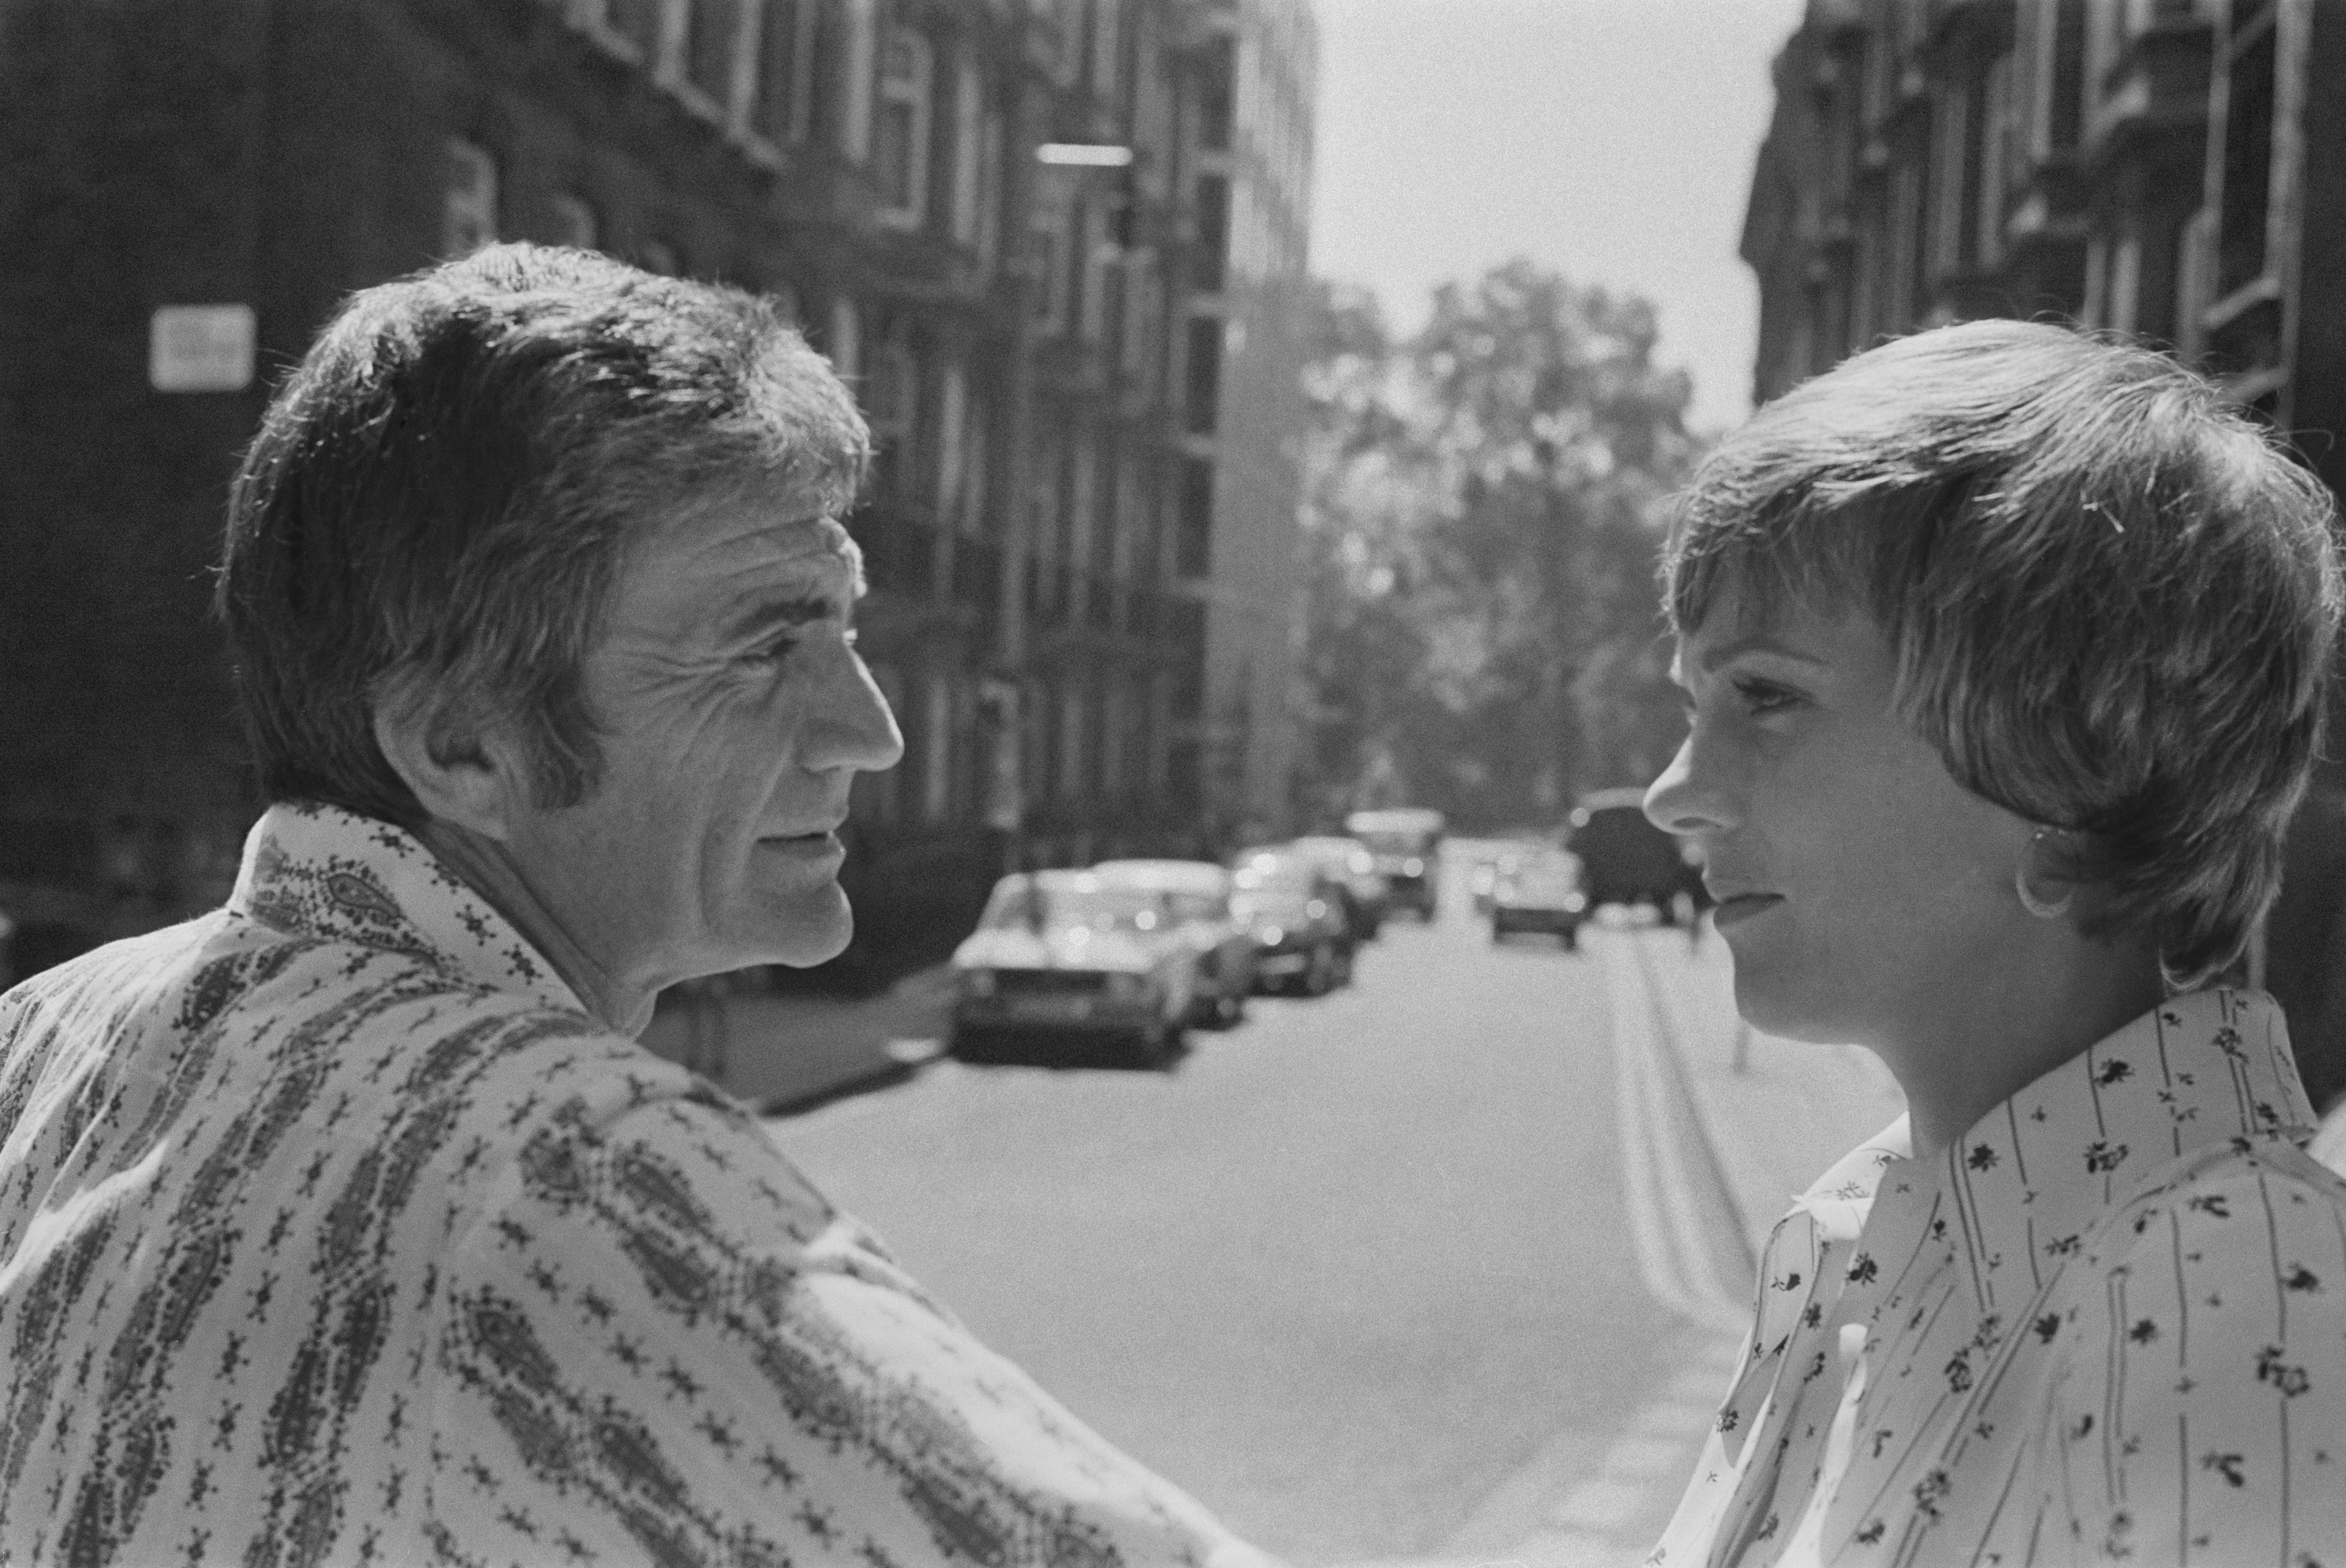 English actress, singer, and author Julie Andrews with her husband, American filmmaker Blake Edwards (1922 - 2010) near Shepherd Market, UK, 9th June 1973. (Photo by Larry Ellis/Daily Express/Hulton Archive/Getty Images)